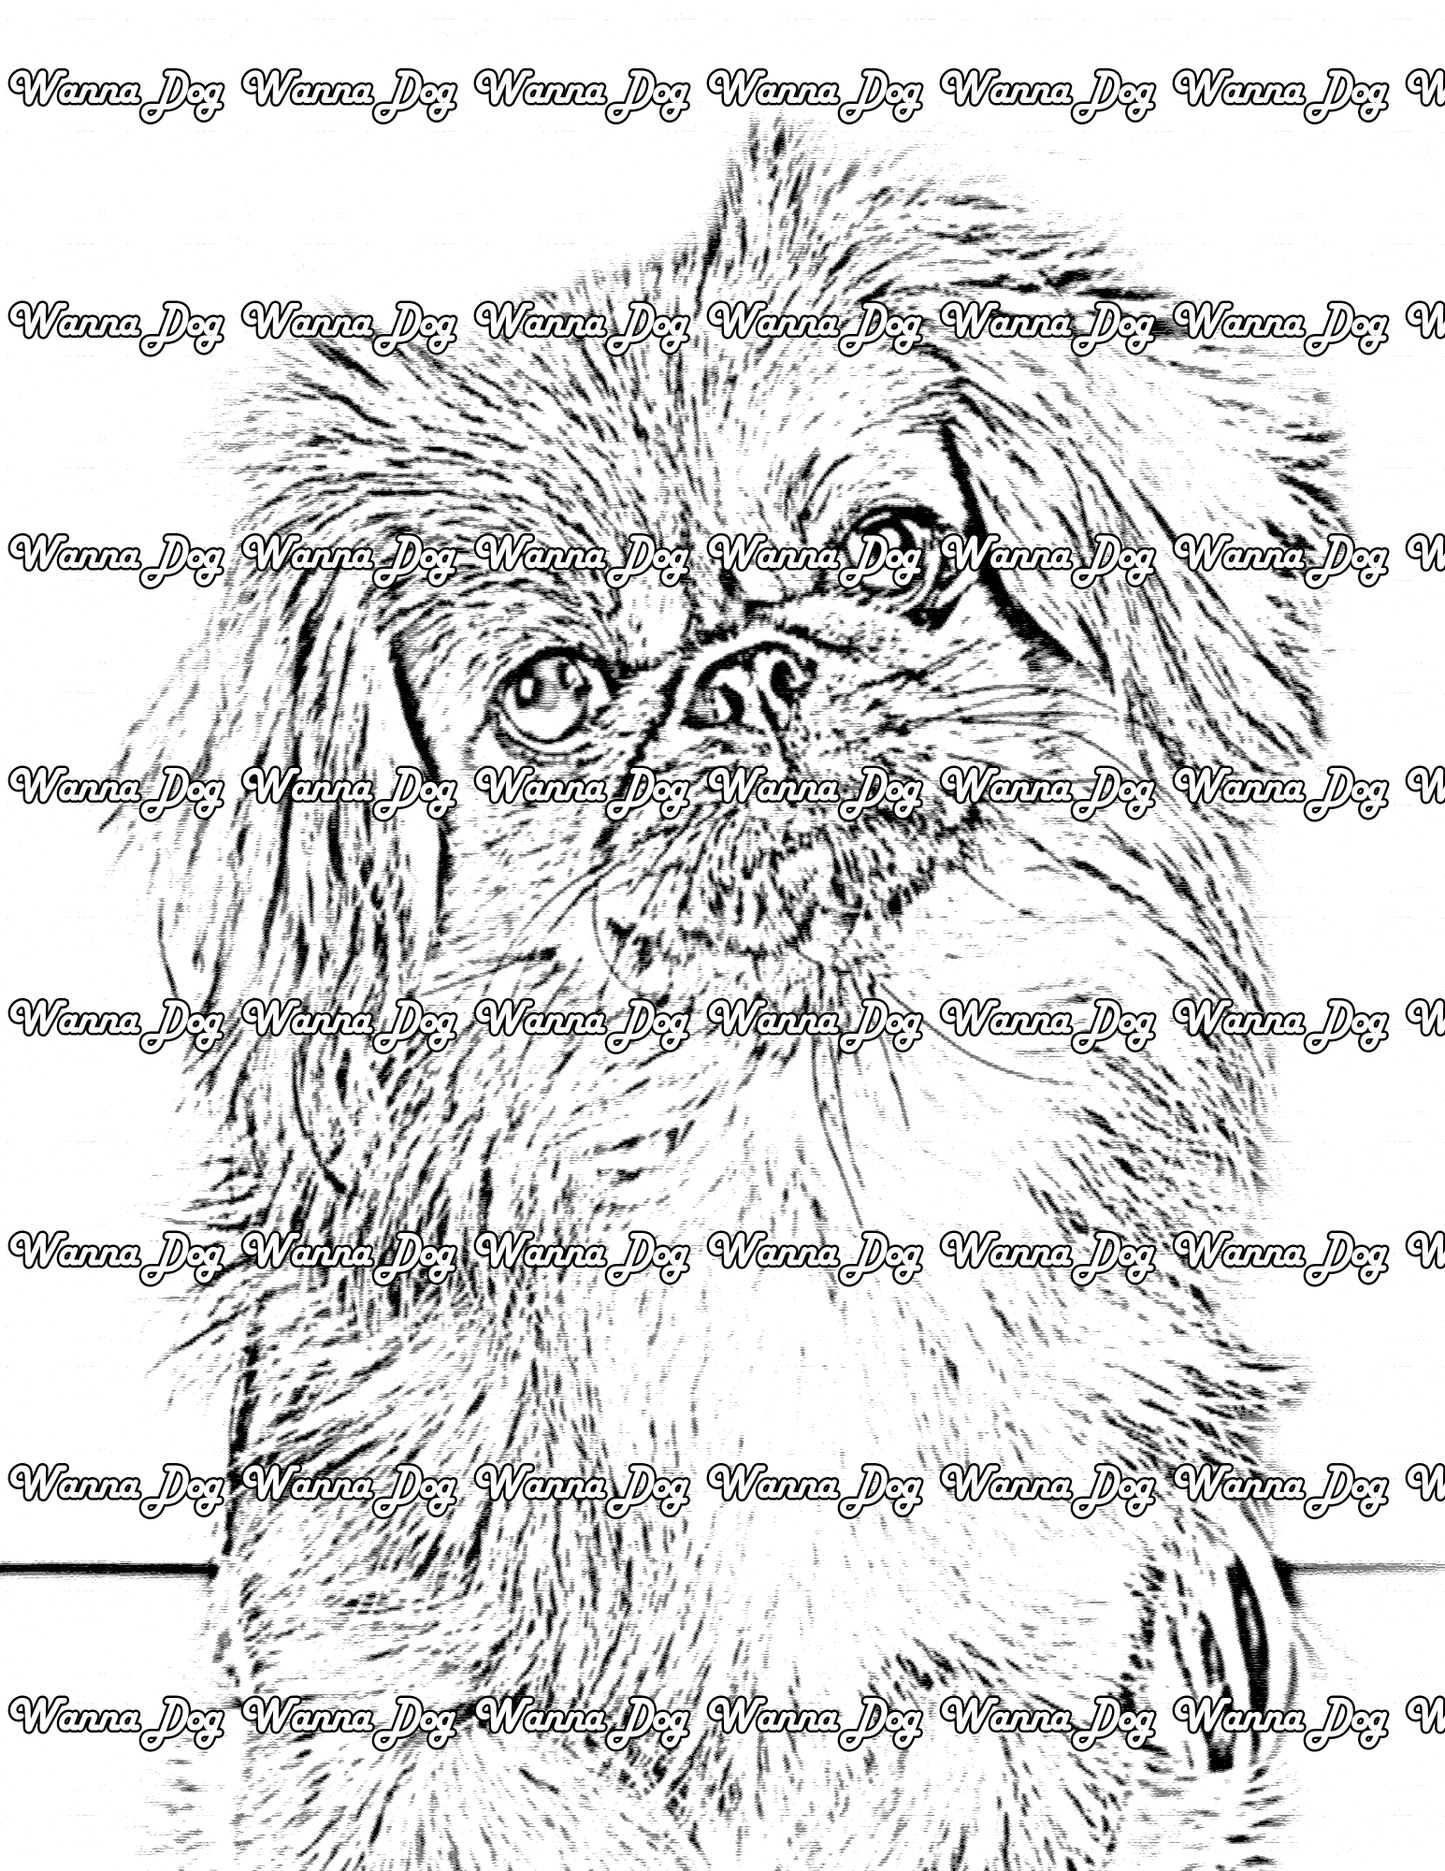 Pekingese Coloring Page of a Pekingese posing with their head tilted